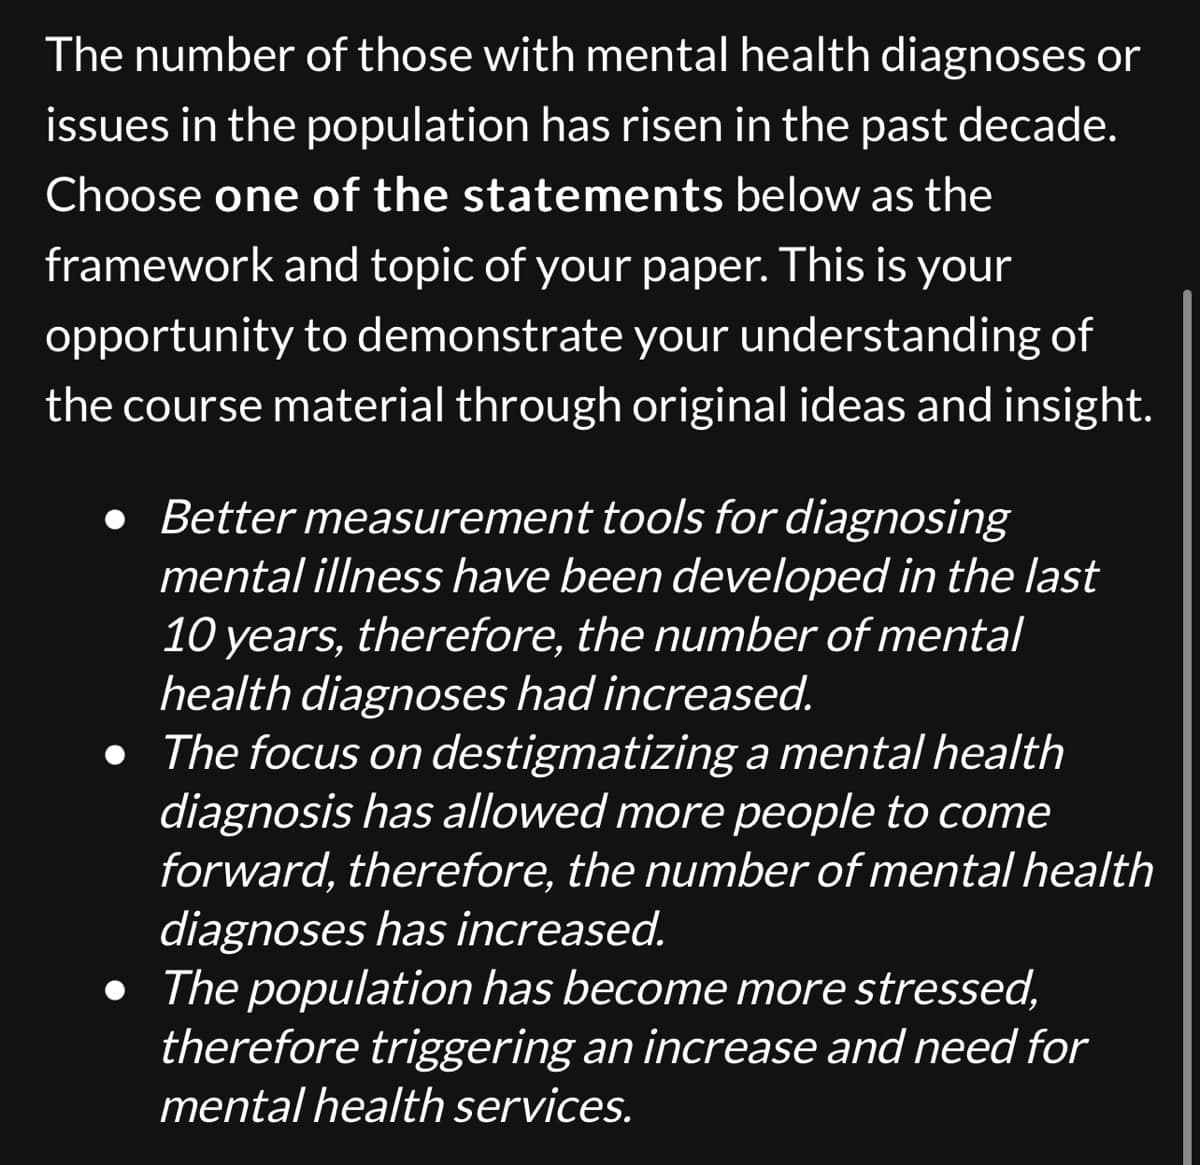 The number of those with mental health diagnoses or
issues in the population has risen in the past decade.
Choose one of the statements below as the
framework and topic of your paper. This is your
opportunity to demonstrate your understanding of
the course material through original ideas and insight.
● Better measurement tools for diagnosing
mental illness have been developed in the last
10 years, therefore, the number of mental
health diagnoses had increased.
• The focus on destigmatizing a mental health
diagnosis has allowed more people to come
forward, therefore, the number of mental health
diagnoses has increased.
• The population has become more stressed,
therefore triggering an increase and need for
mental health services.